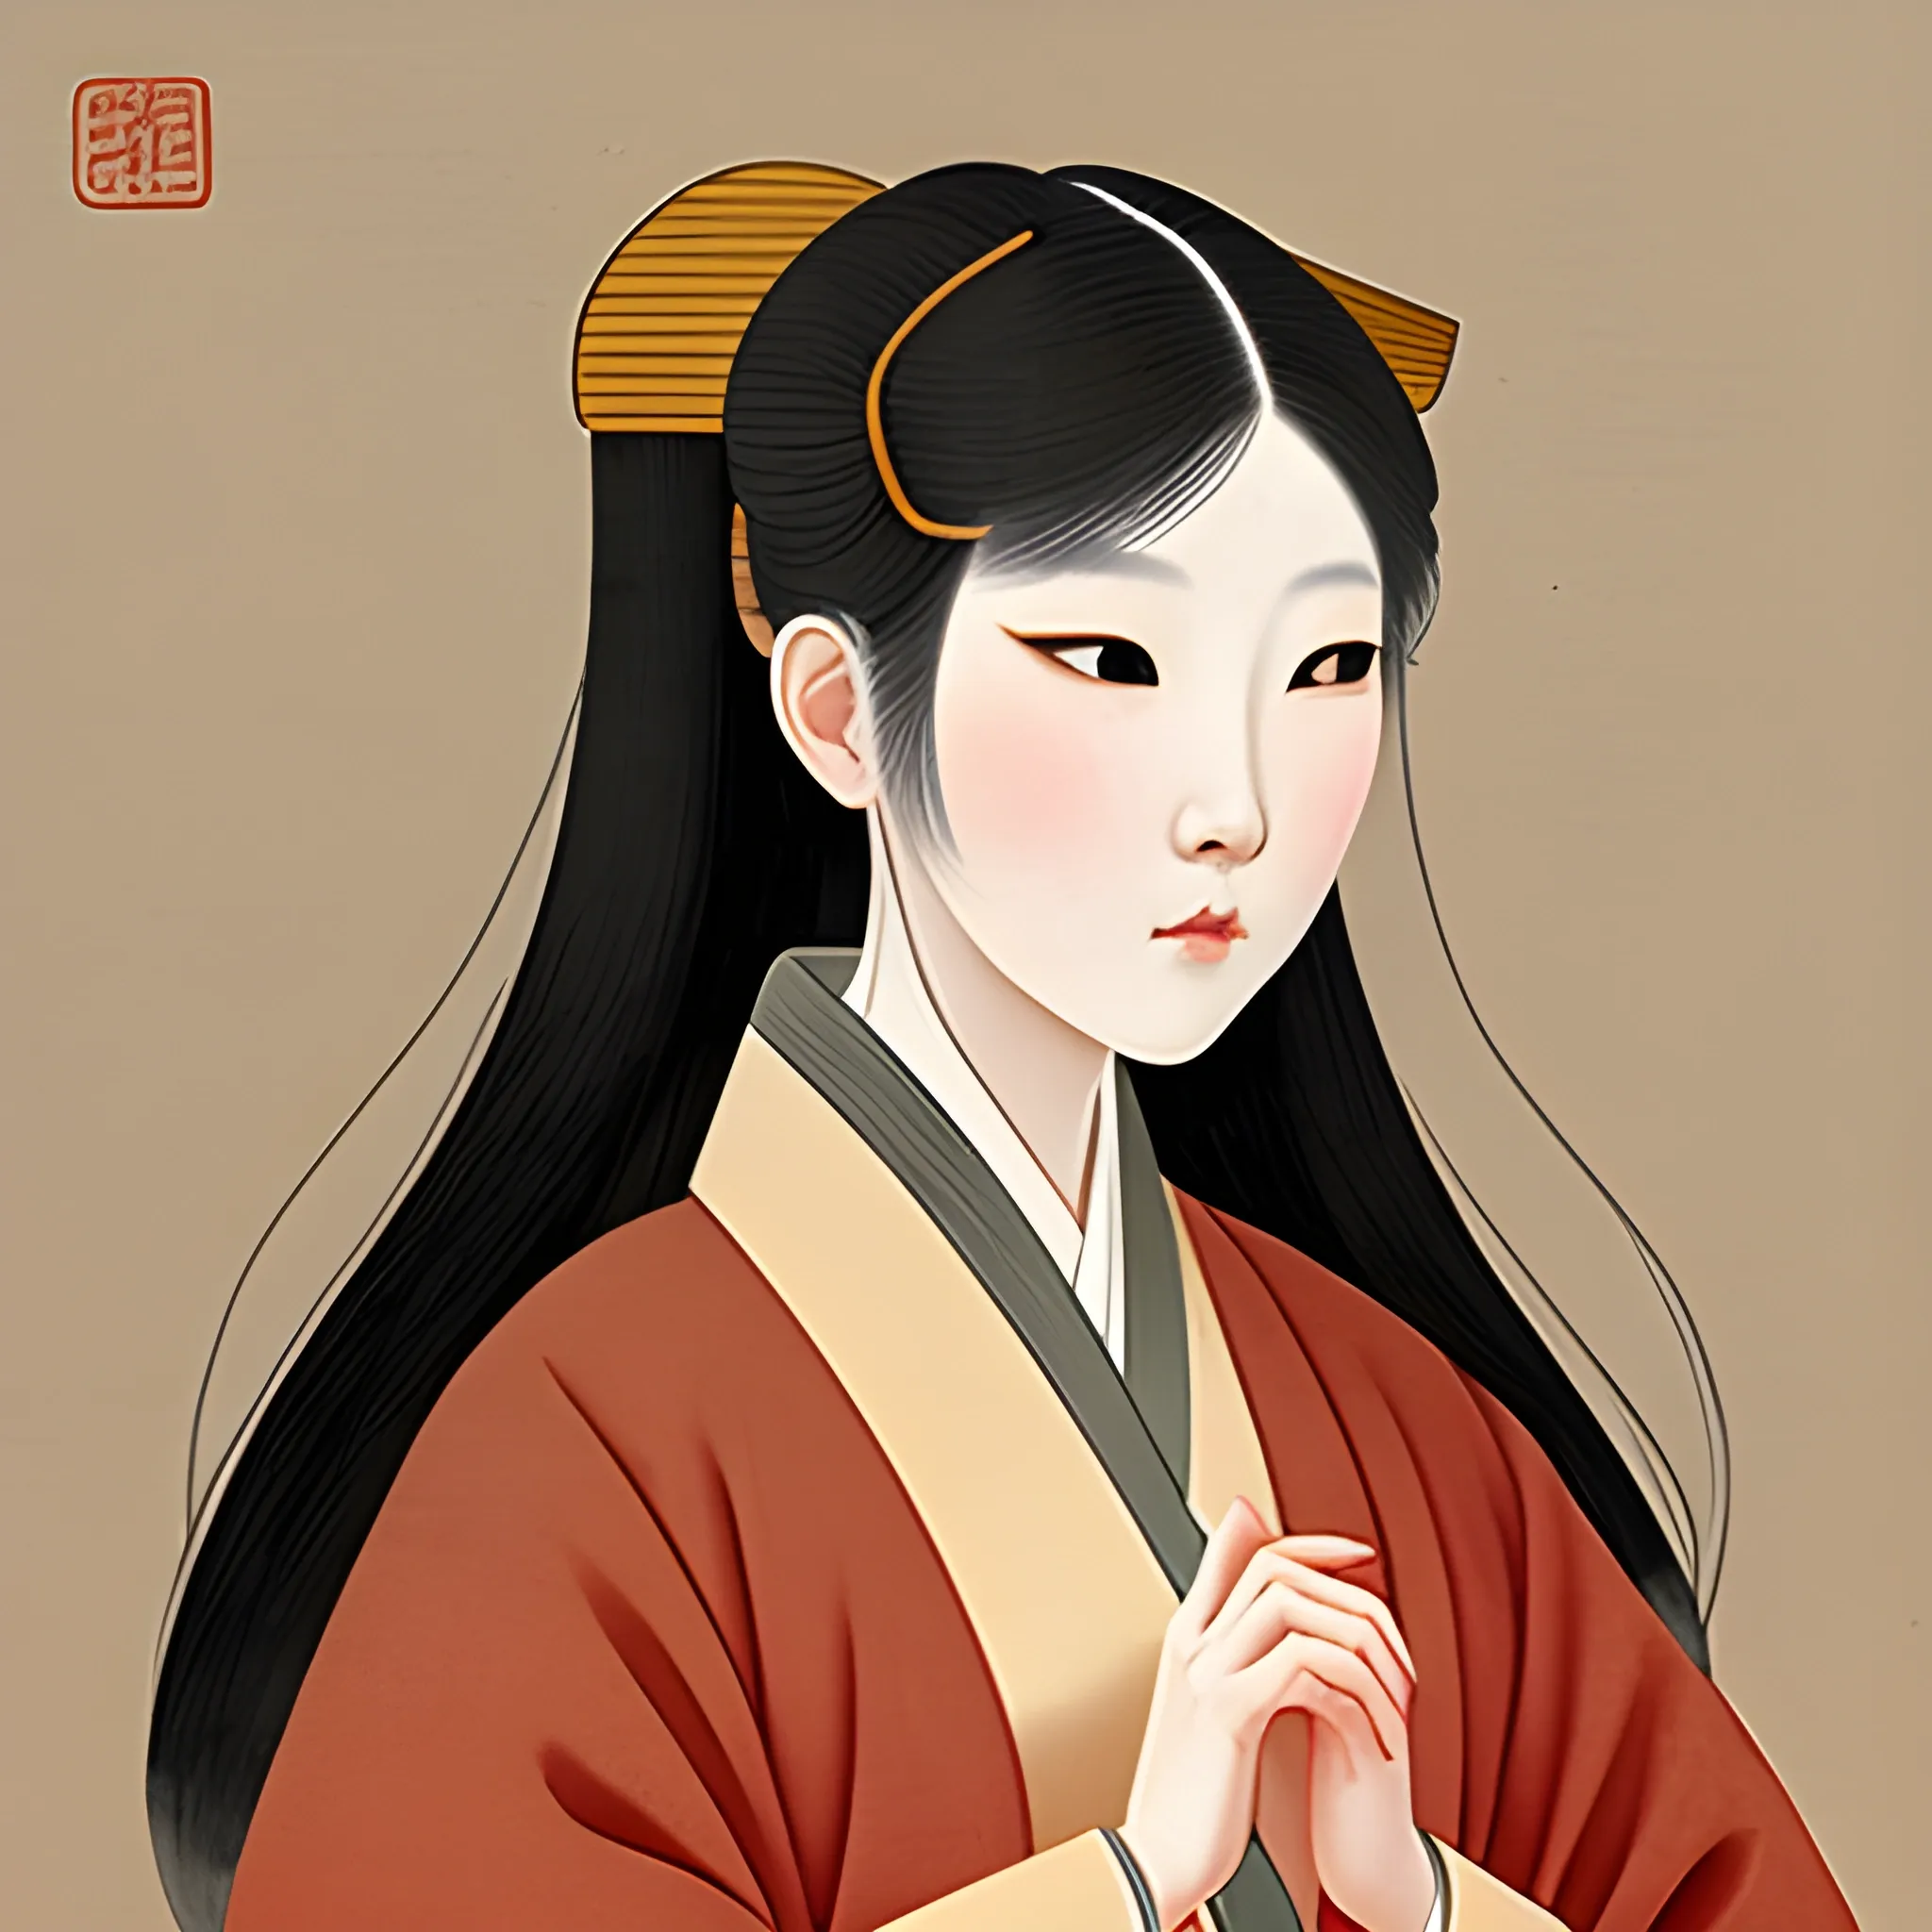 Pictures of ladies in ancient Korean traditional painting style, elegant, master paintings, beautiful modern western women face